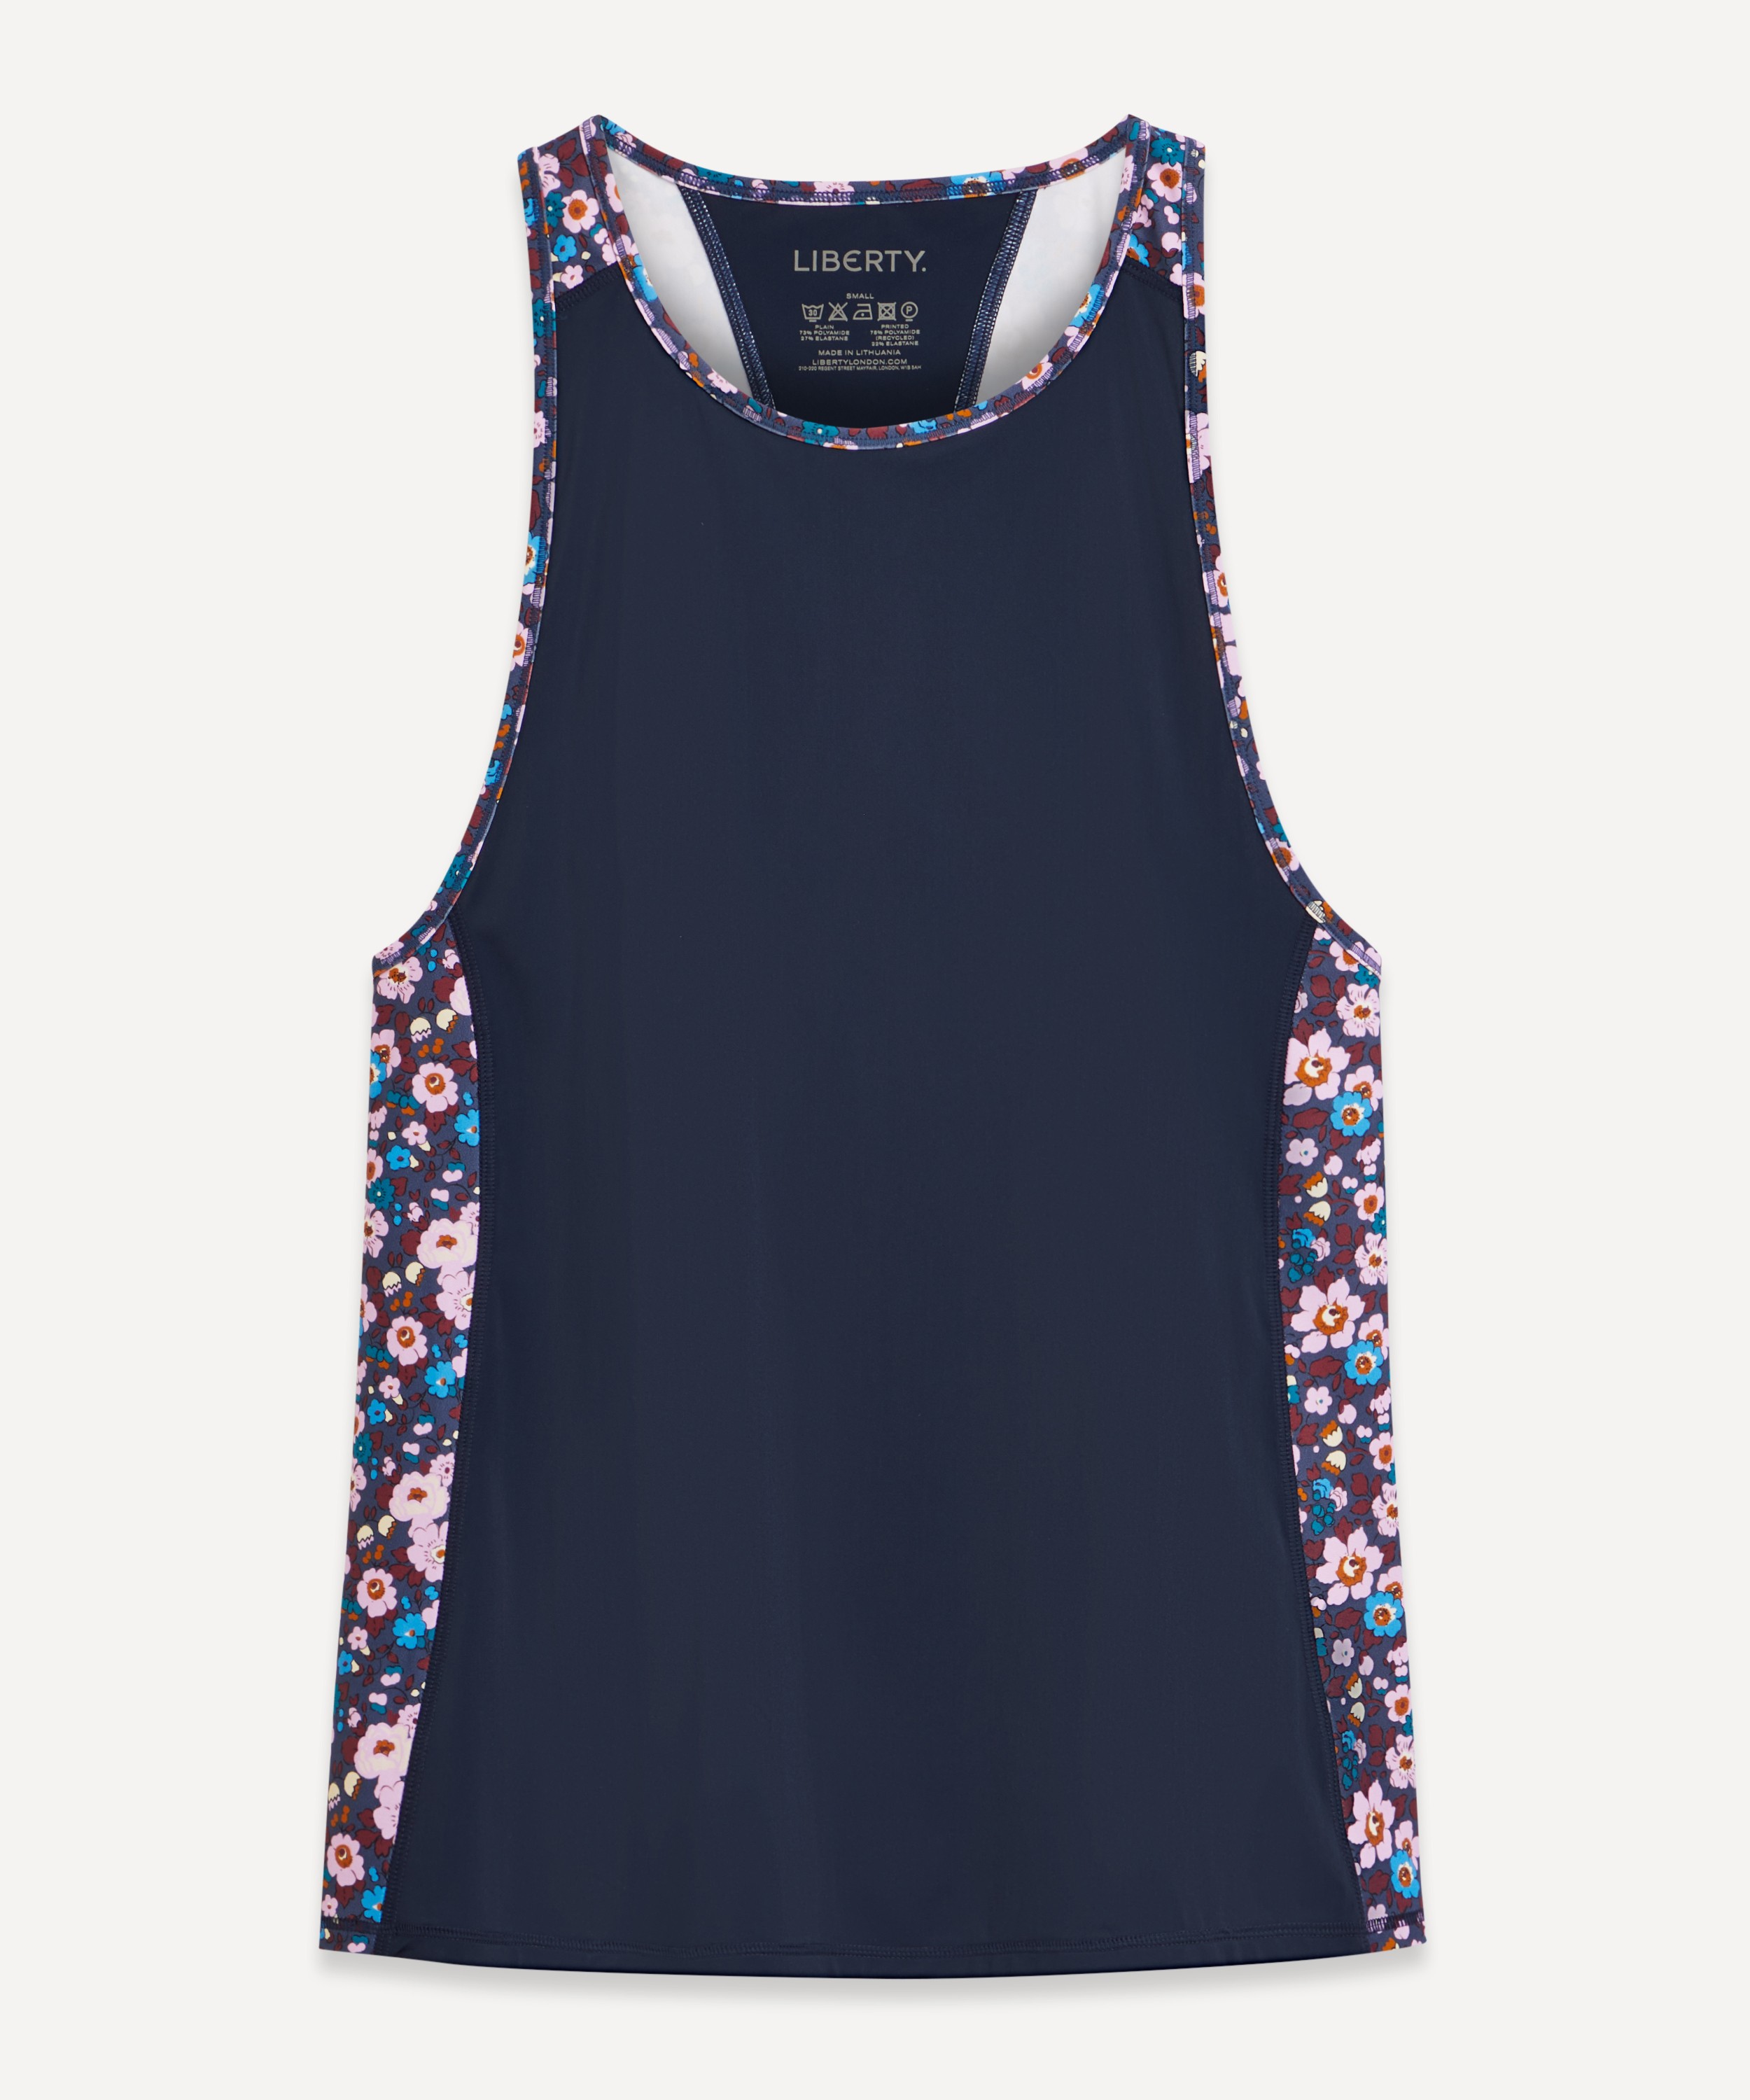 Liberty - Betsy Panel Vest Top image number null